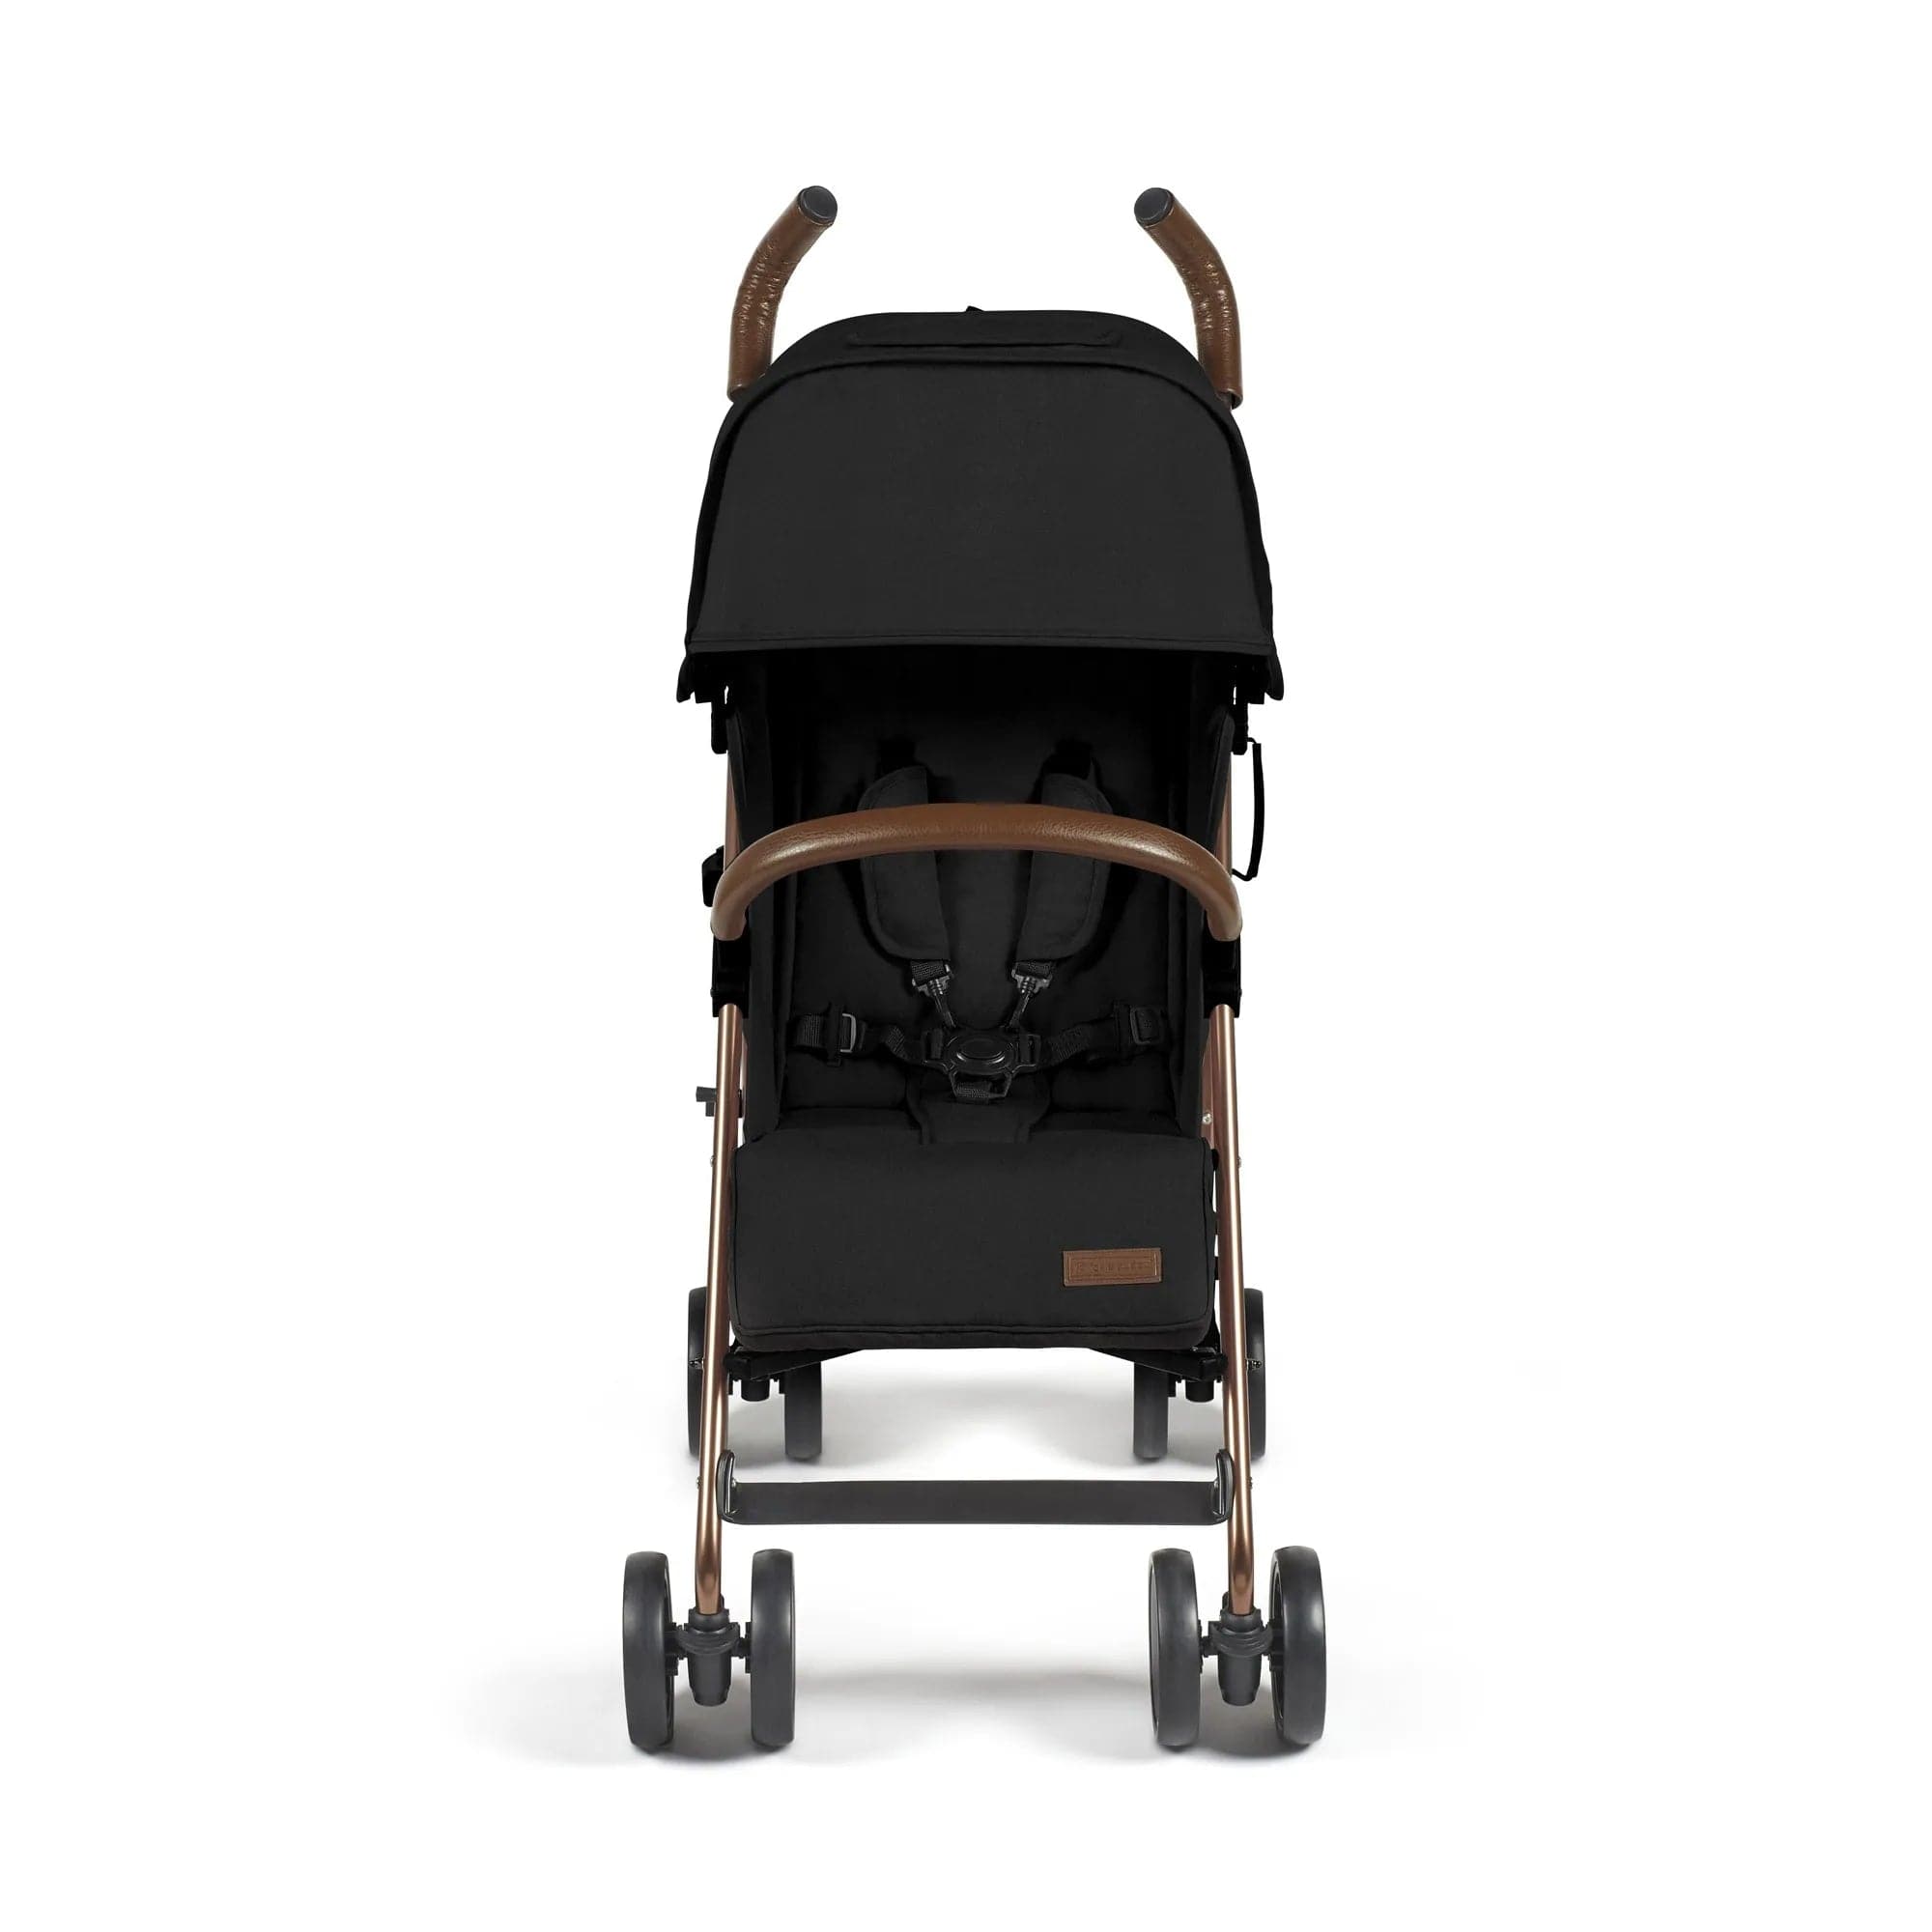 Ickle bubba Discovery Stroller - Black on Rose Gold - For Your Little One